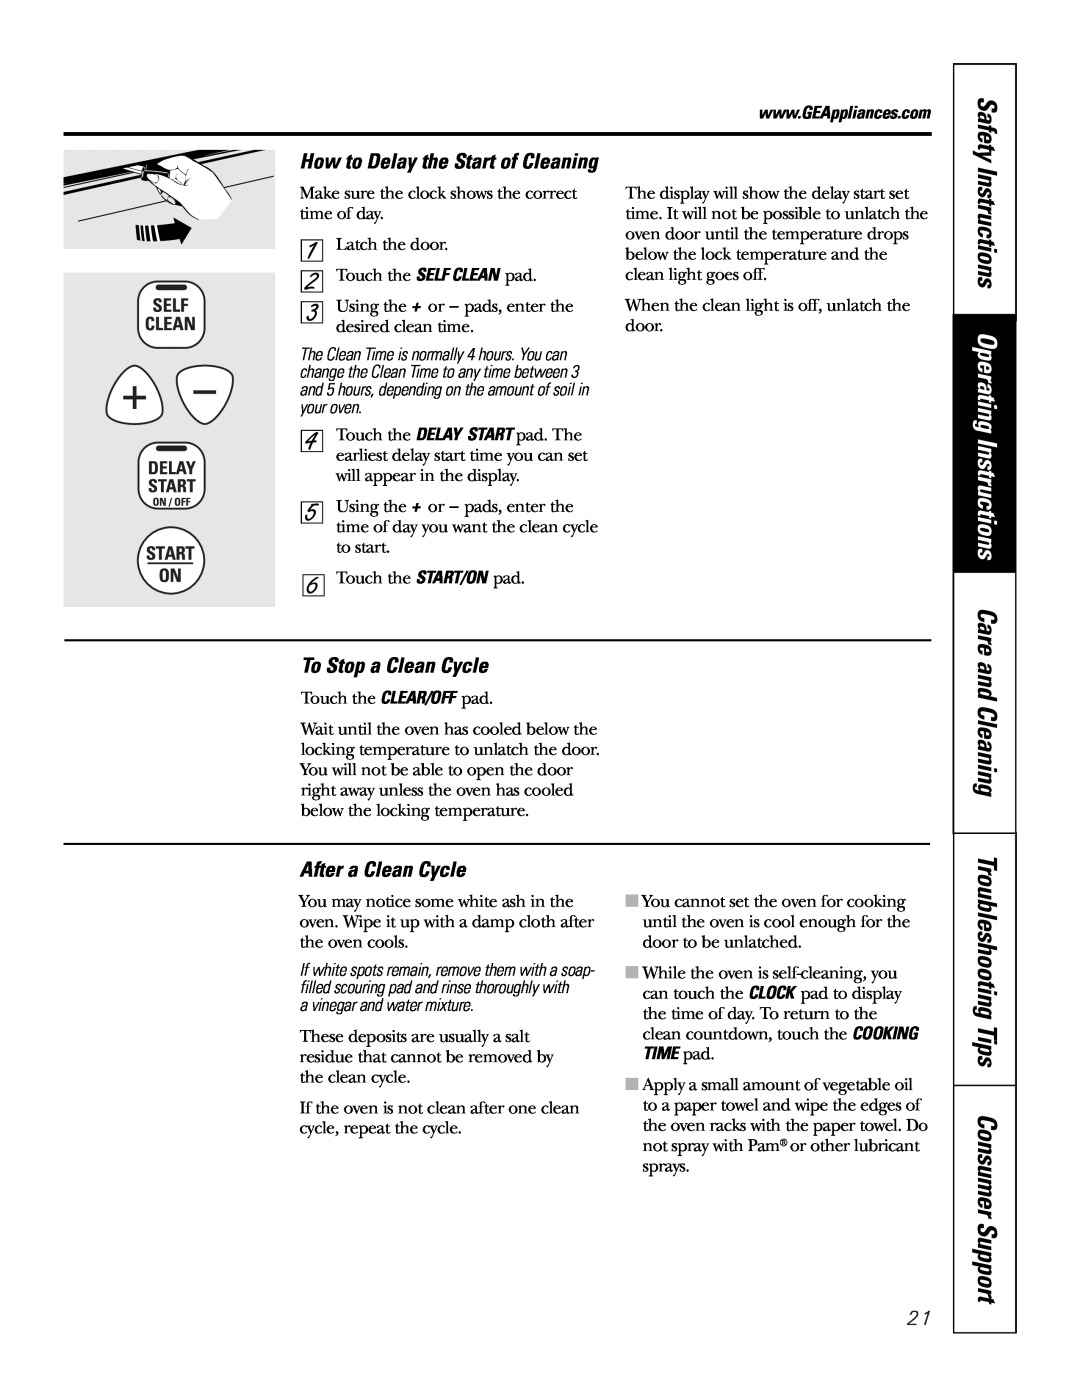 GE JGSP28 Instructions Operating Instructions Care, Troubleshooting Tips Consumer Support, To Stop a Clean Cycle 